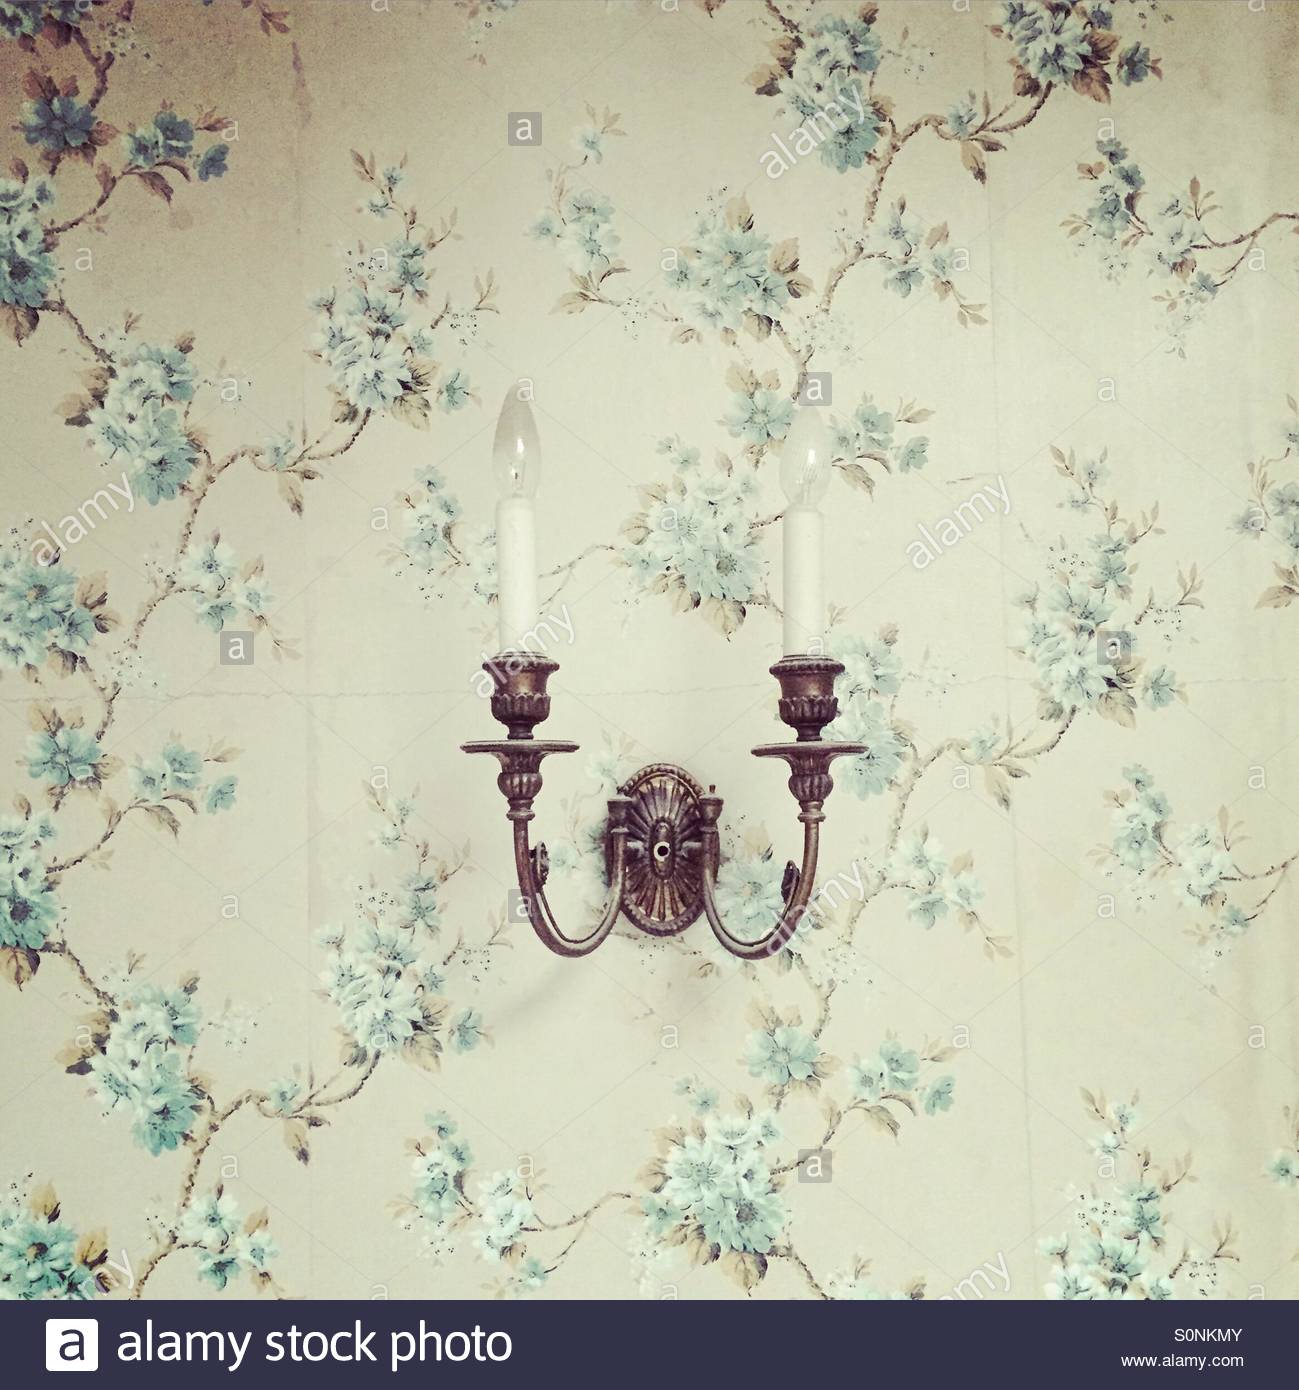 Sconce On Wallpaper Stock Photo